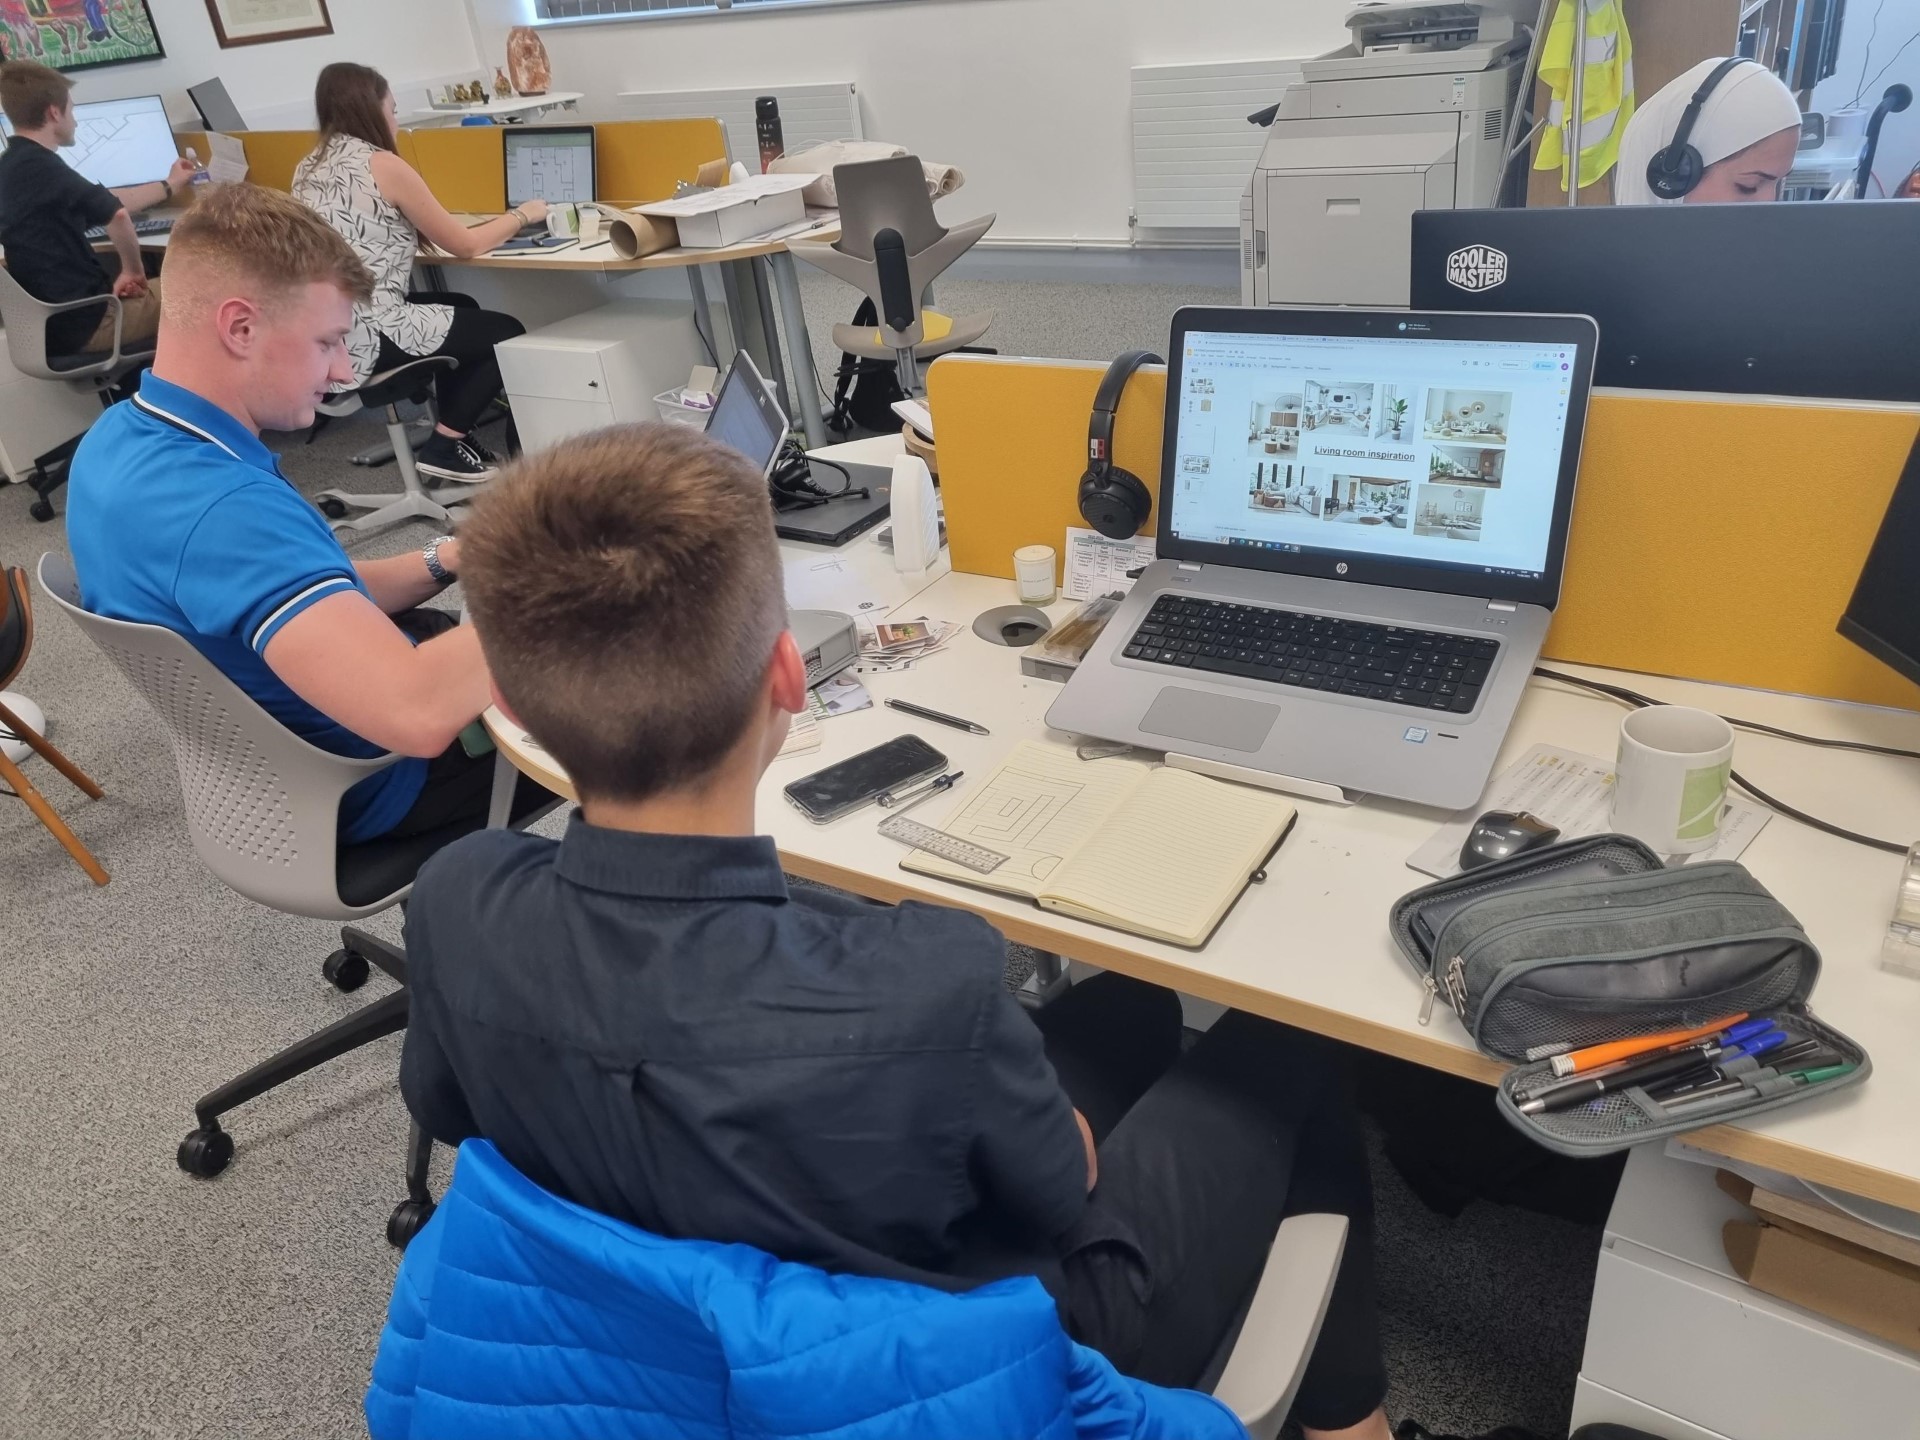 ACA offers architecture work experience to local students